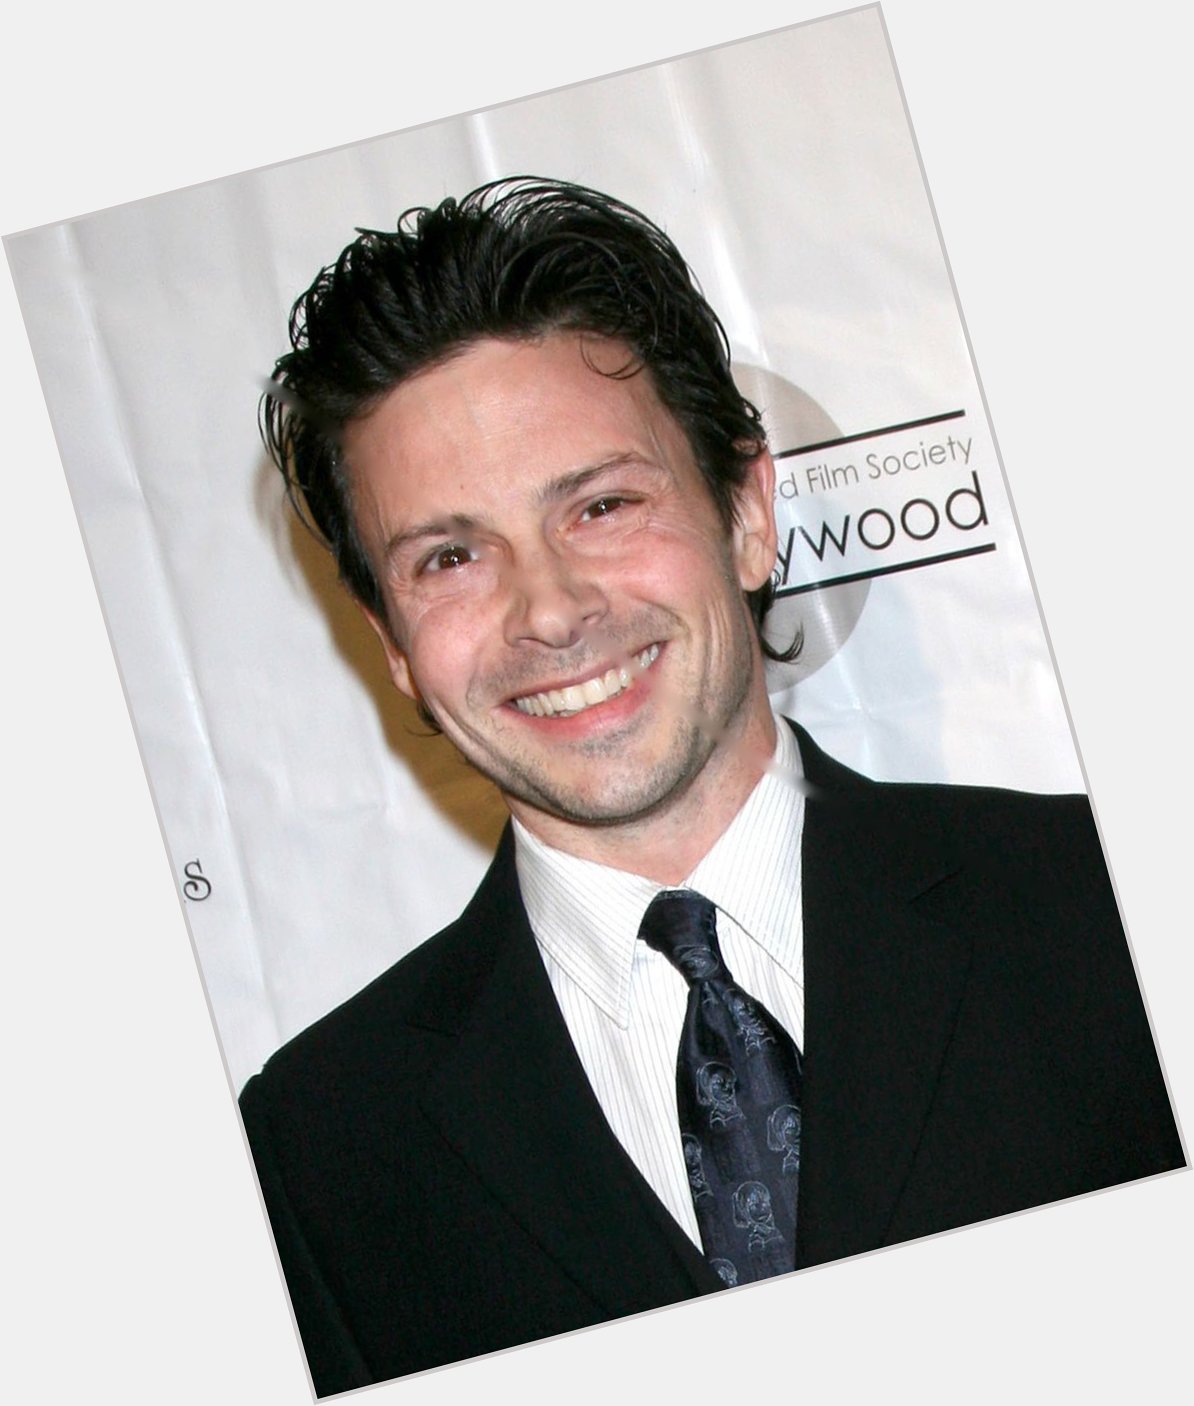 HAPPY 44th BIRTHDAY to JASON MARSDEN!! 
American actor, voice actor, director and producer. 